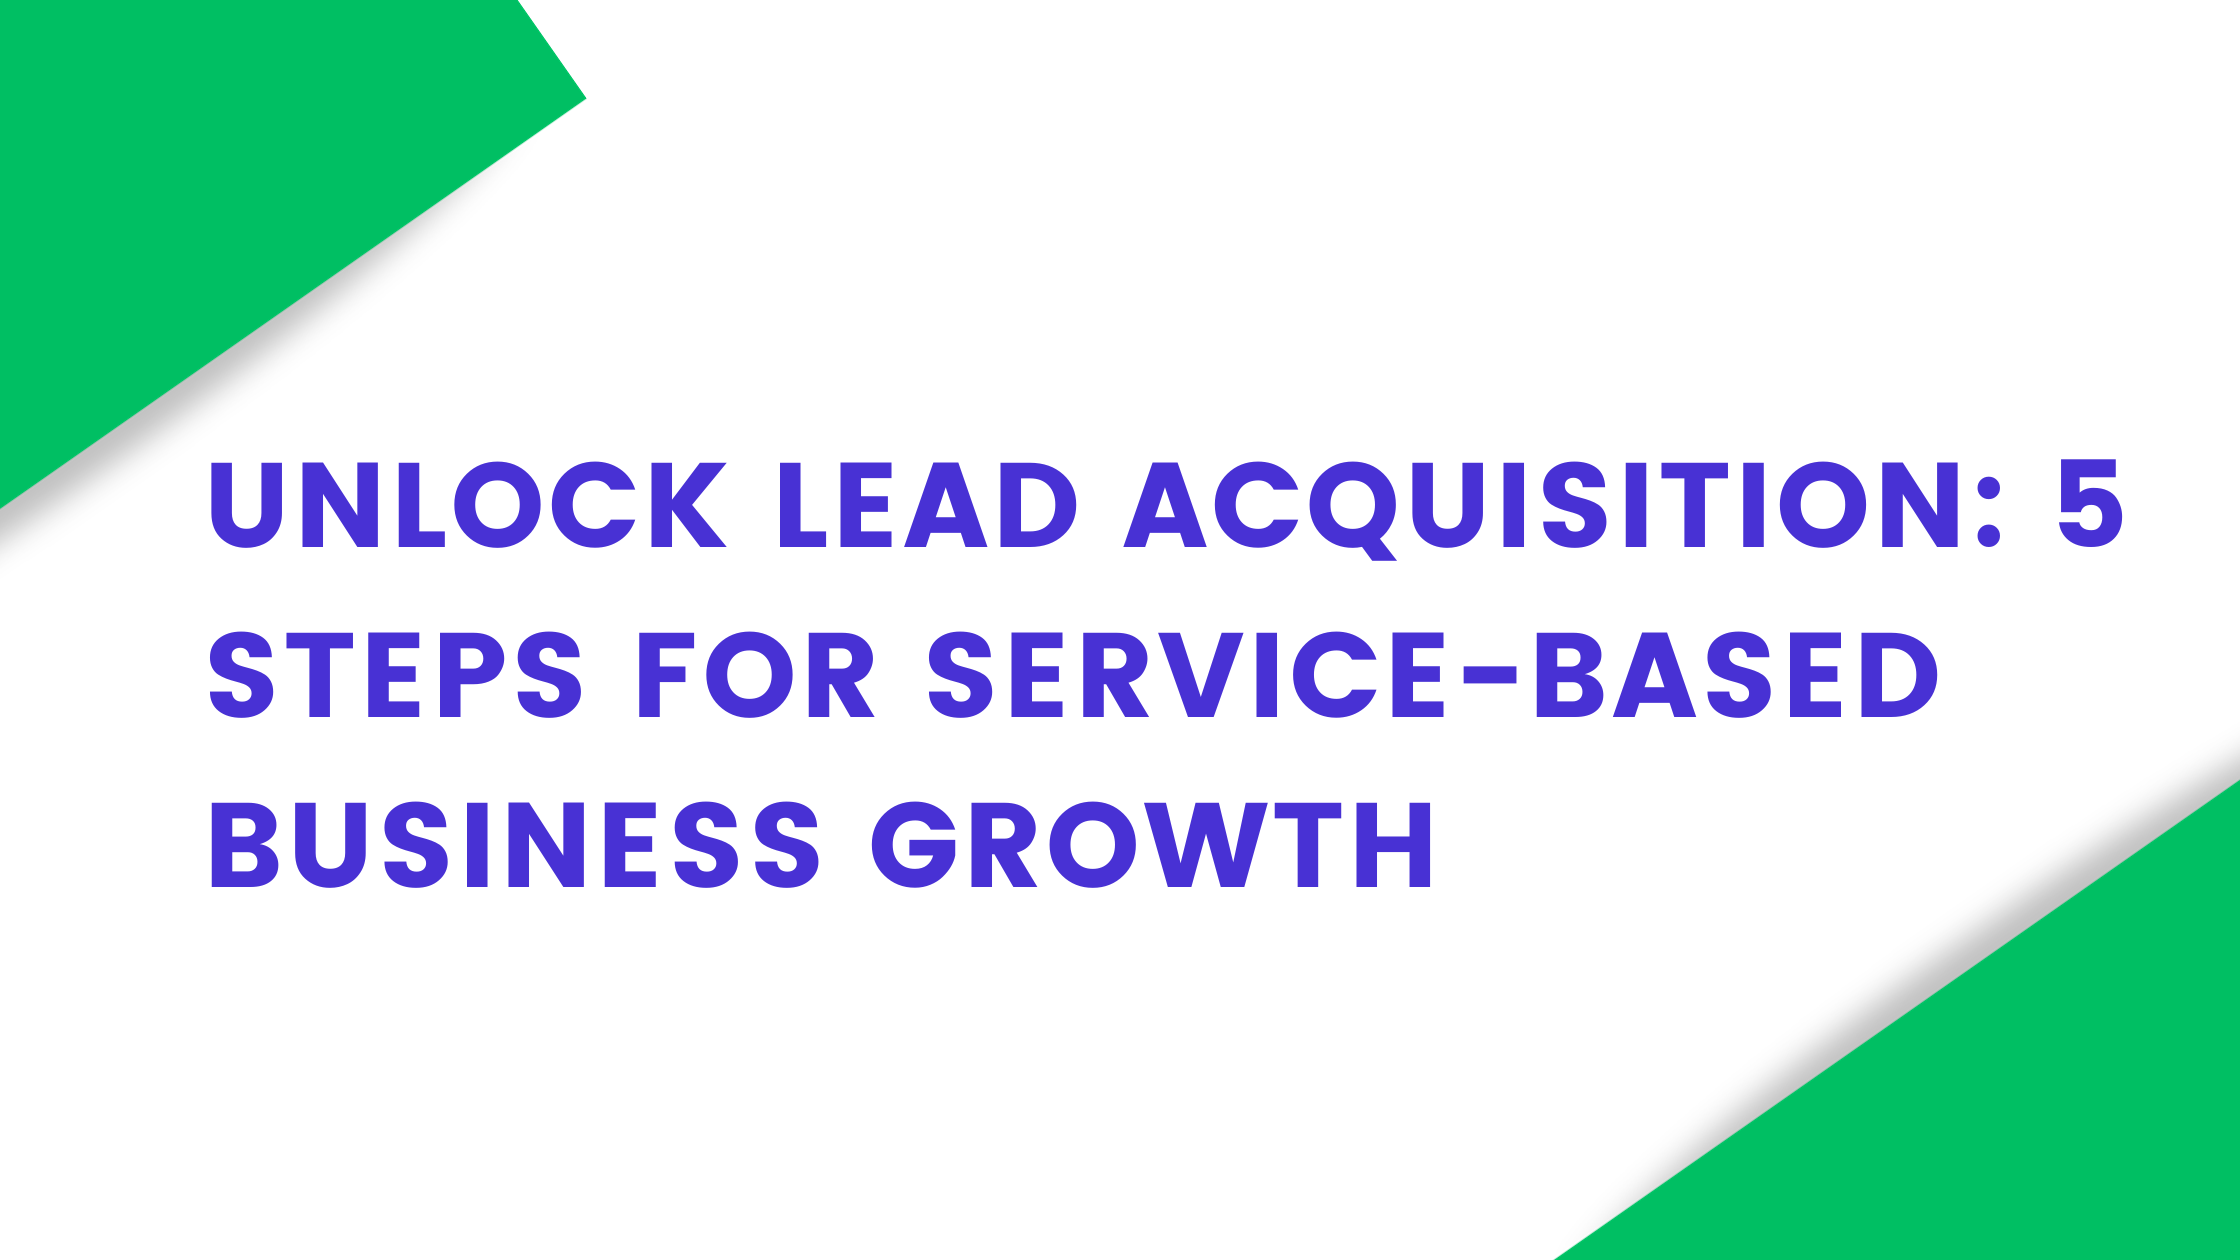 Unlock Lead Acquisition: 5 steps for Service-based business Growth